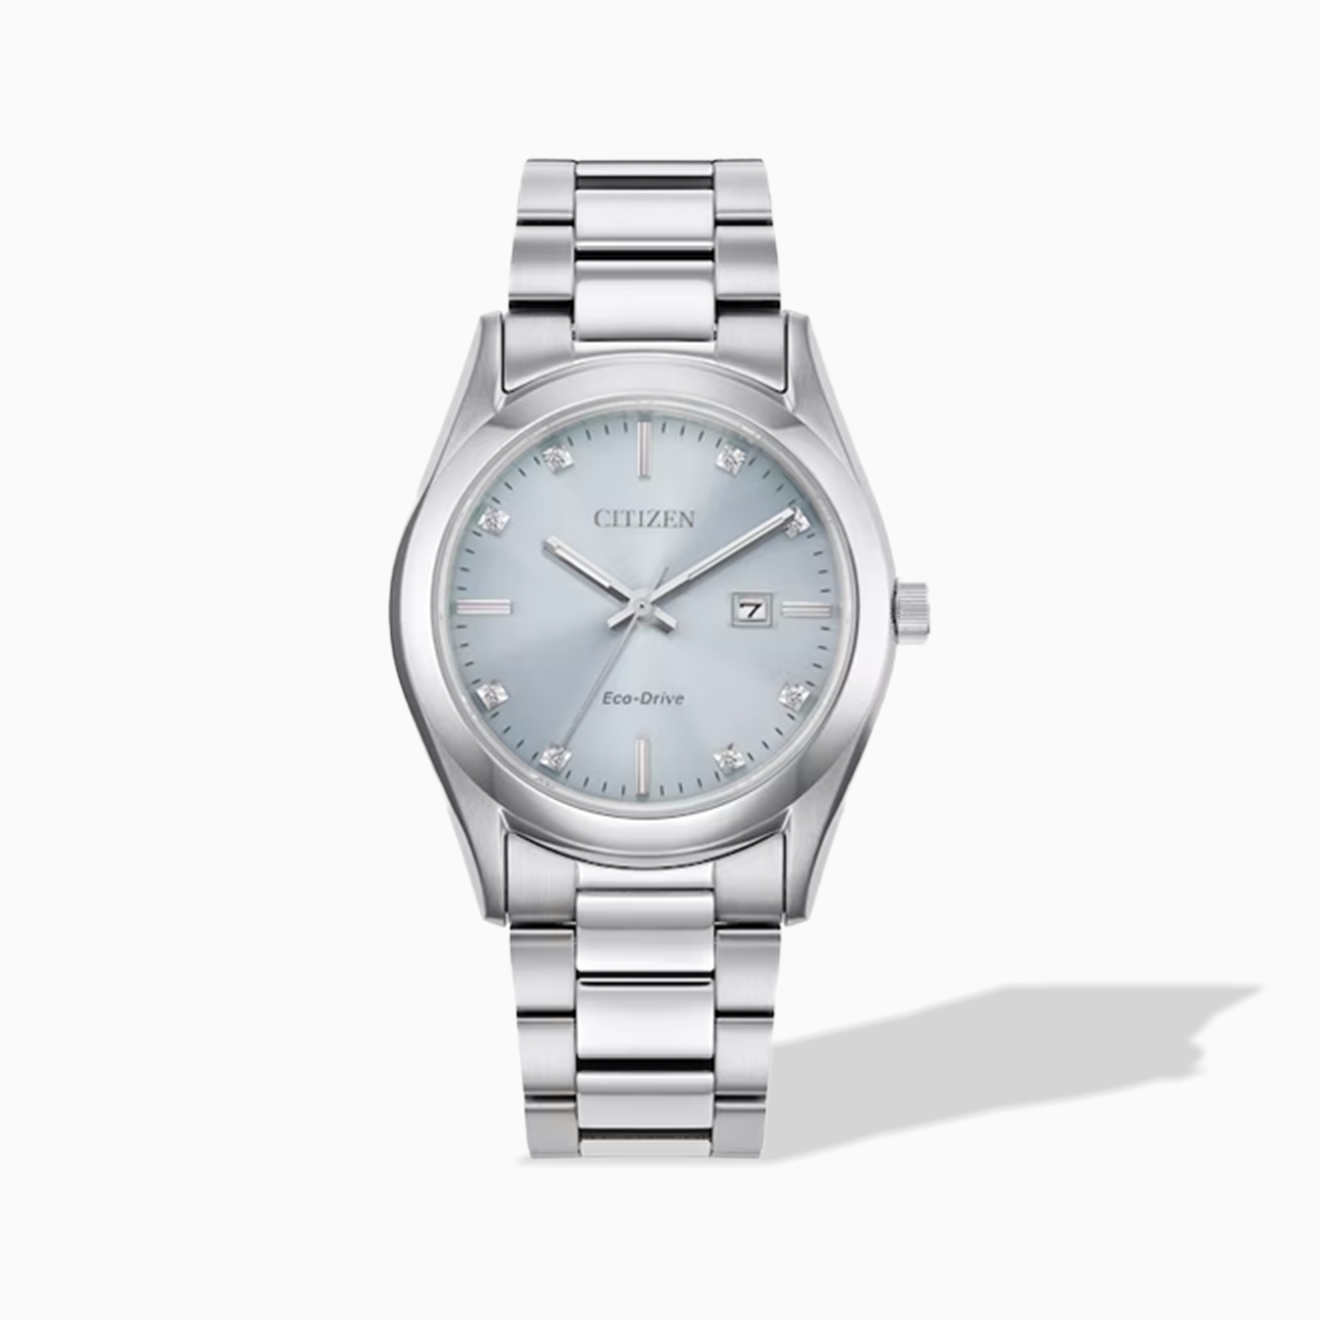 Shop Stainless Steel watches